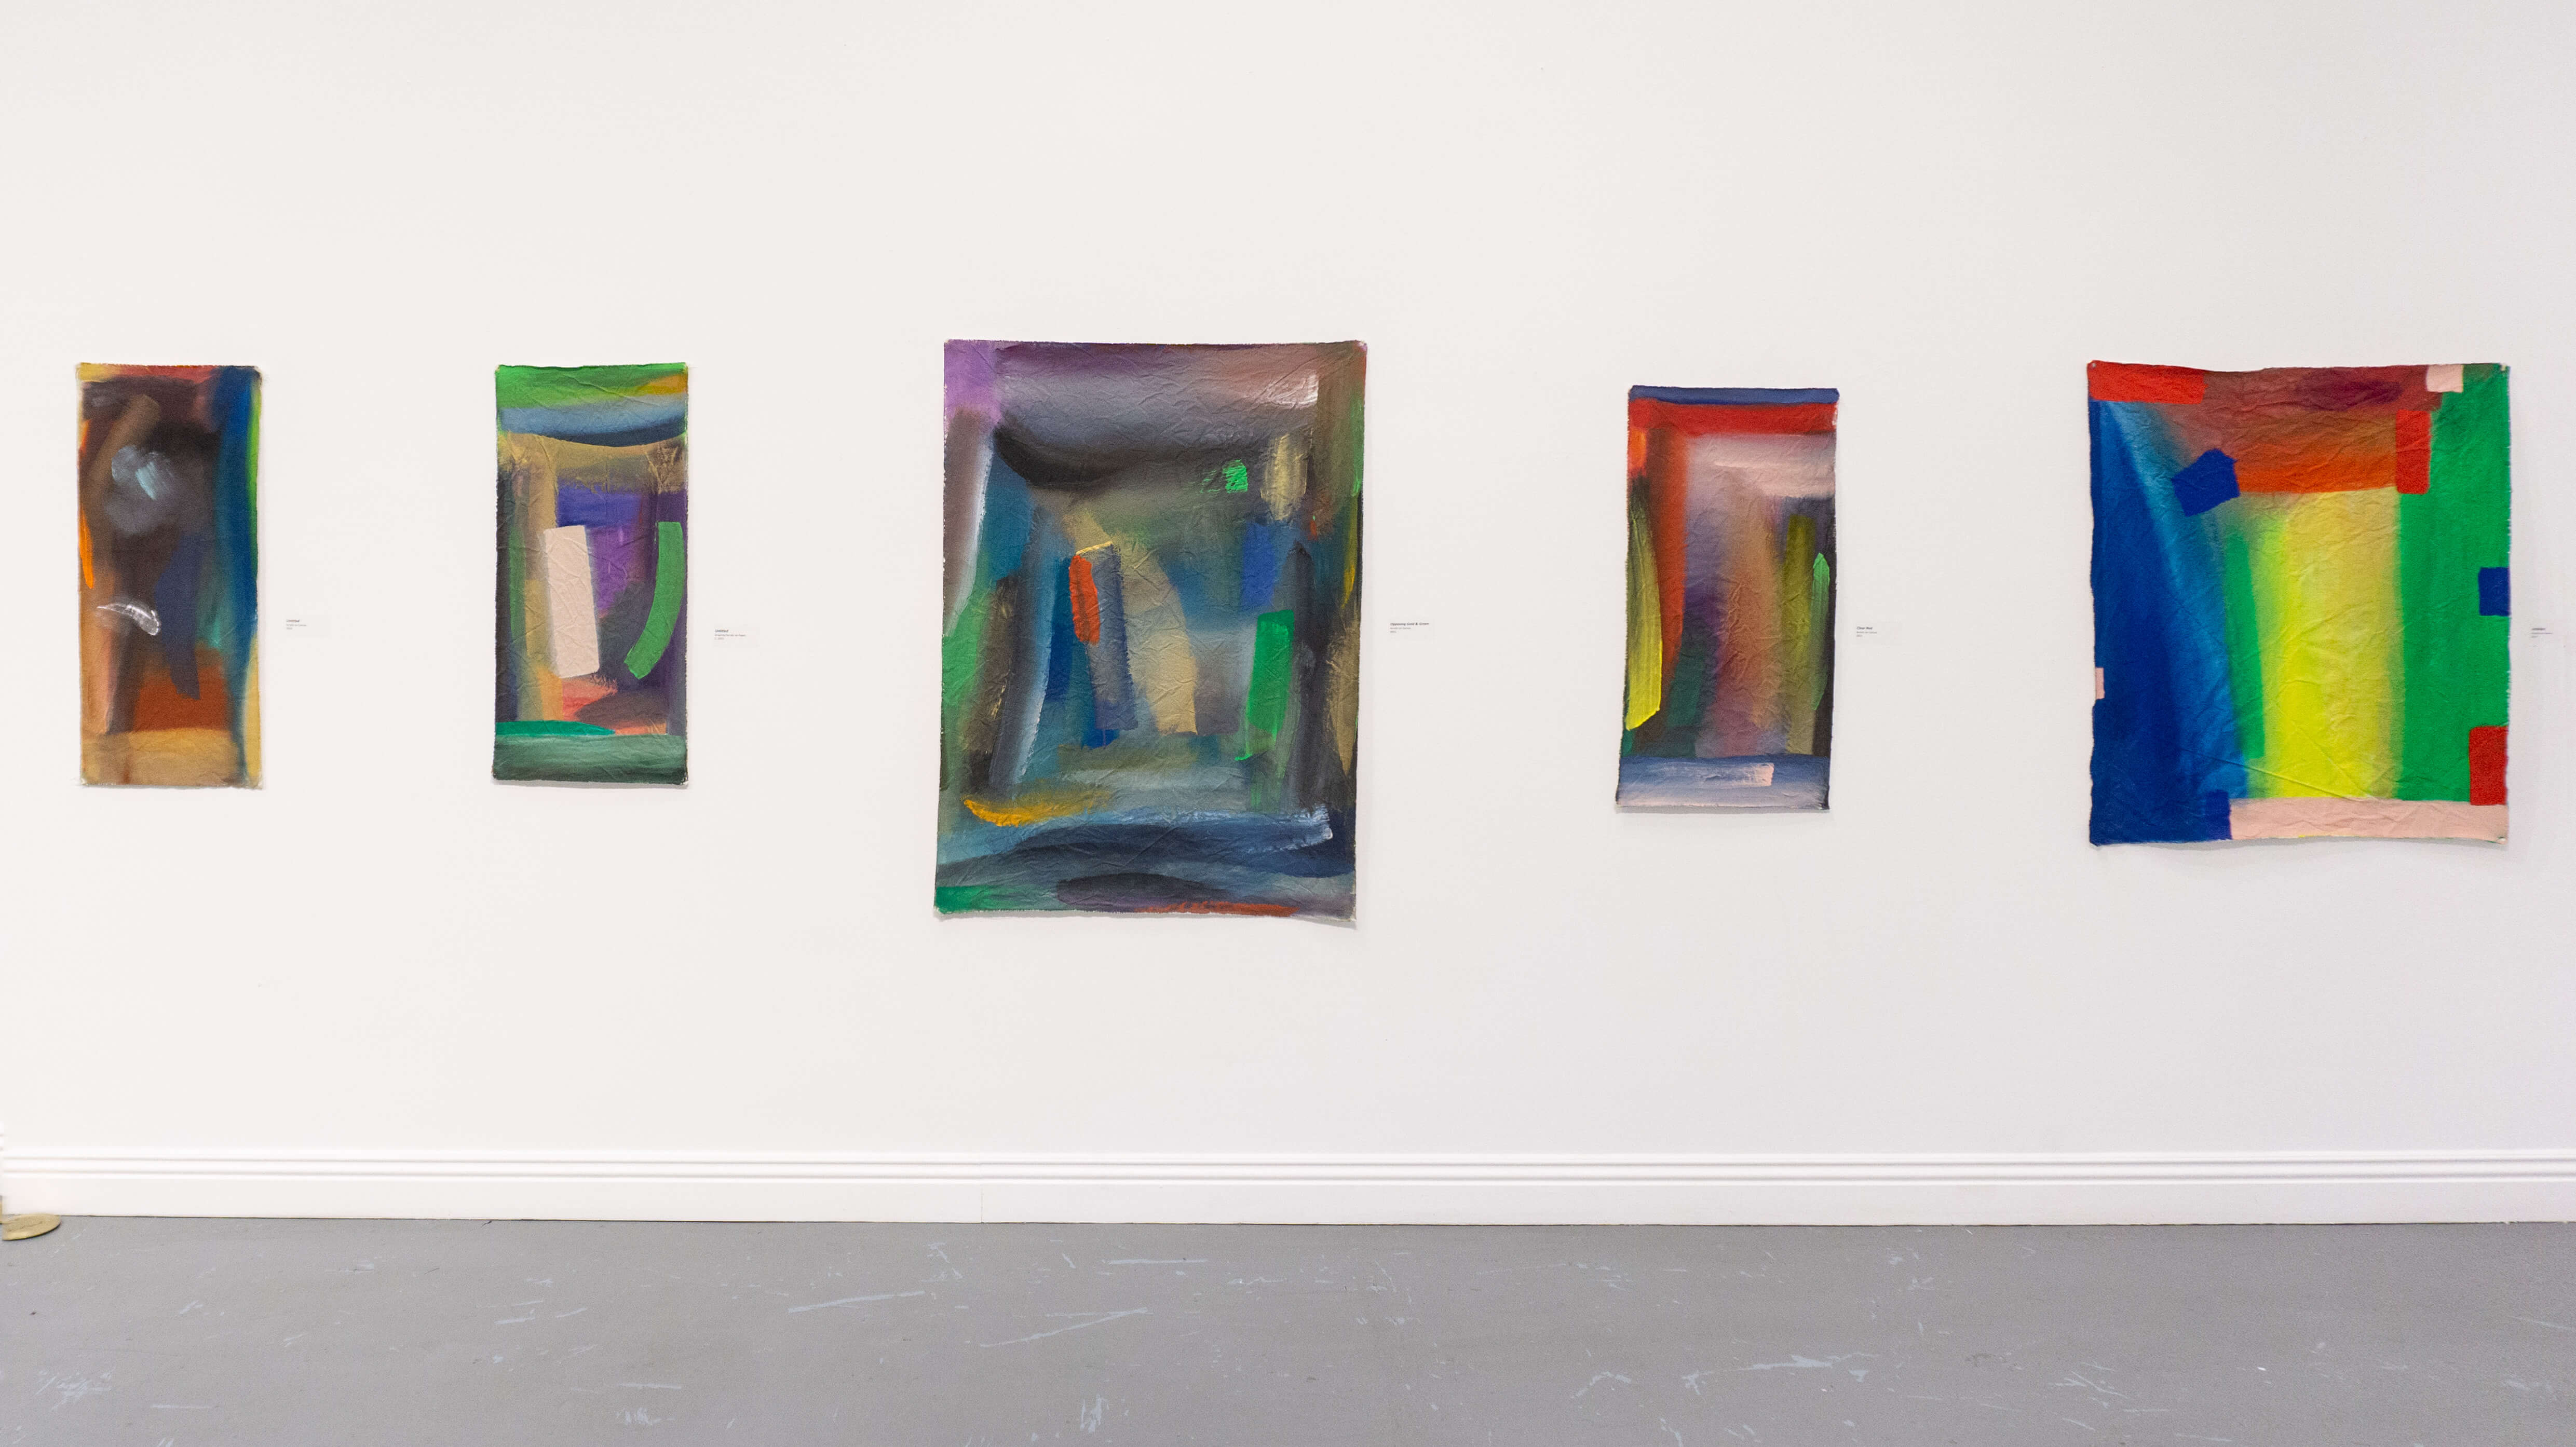 Installation view, Keisho Okayama: Selected Works - Late paintings from 2014-2017, acrylic on canvas